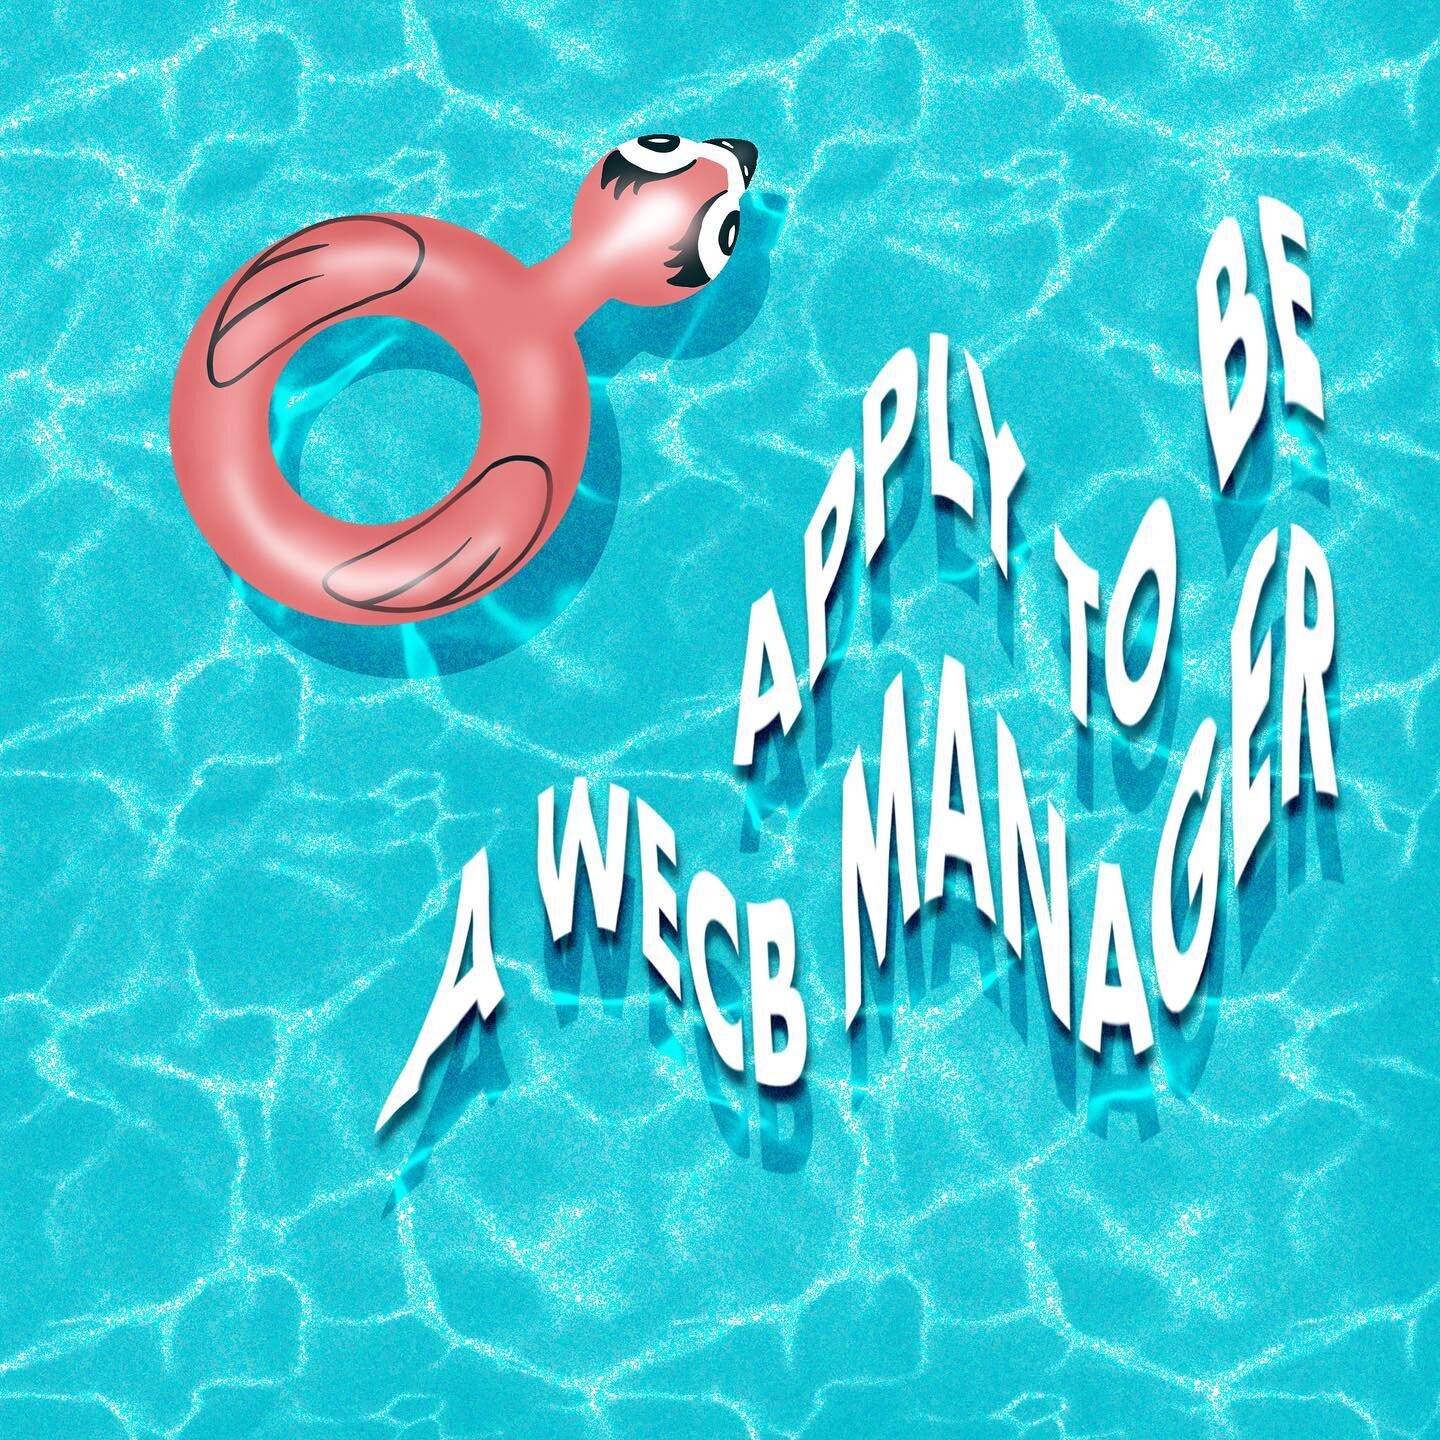 Apply to be a WECB manager!

Application forms are available on our LinkTree!

Available positions include:
1. General Manager
2. Operations Manager
3. Programming Director
4. Assistant Manager
5. Outreach Coordinator
6. Events Coordinator
7. Art Director

ALT TEXT:

A pink flamingo pool float amidst a pool-like background; [TEXT READS: APPLY TO BE A WECB MANAGER]